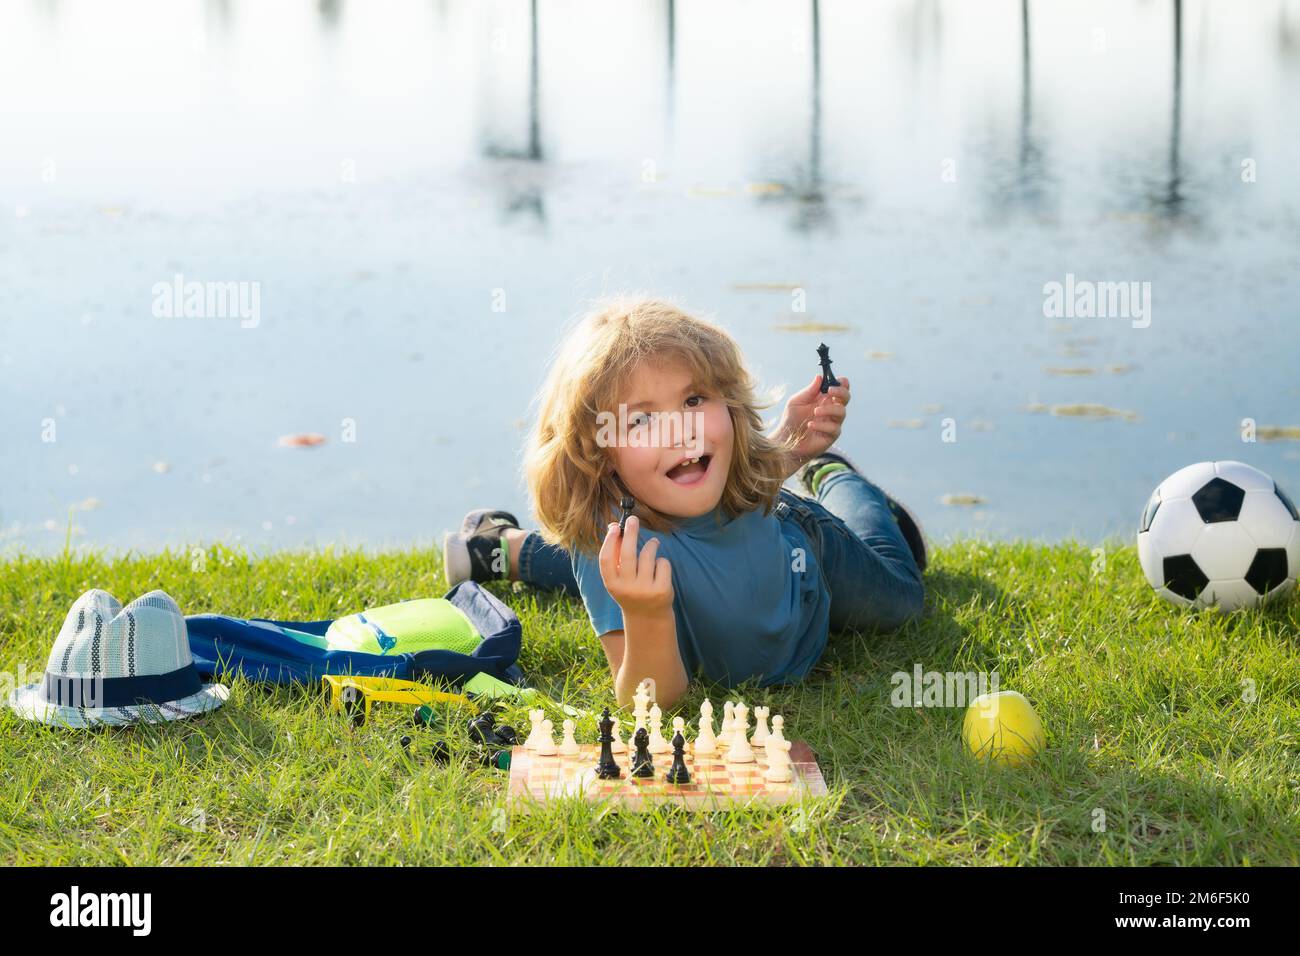 Kid shows chess pieces on a chessboard. Little child play chess. Kid playing board game. Thinking child brainstorming and idea in chess game. Chess Stock Photo